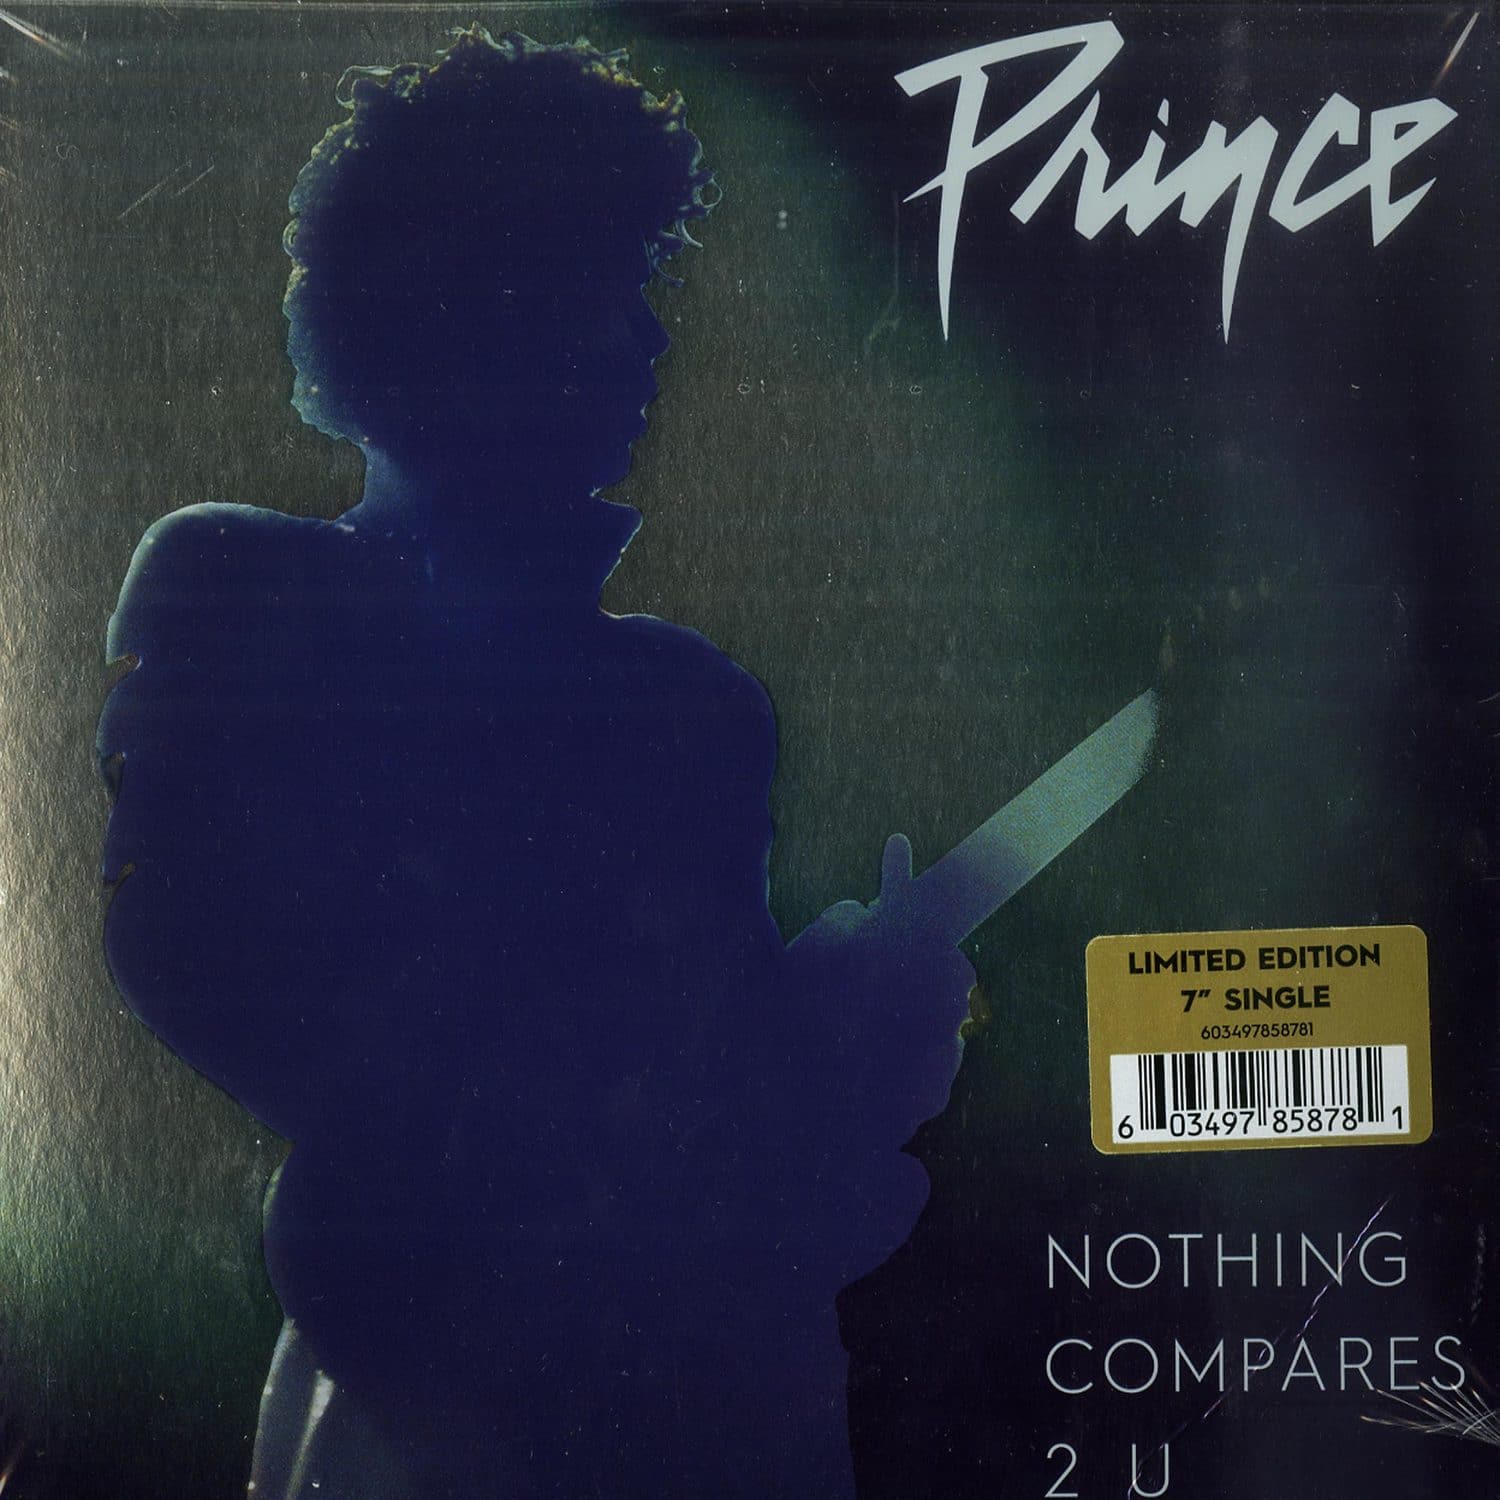 Prince - NOTHING COMPARES 2 U 